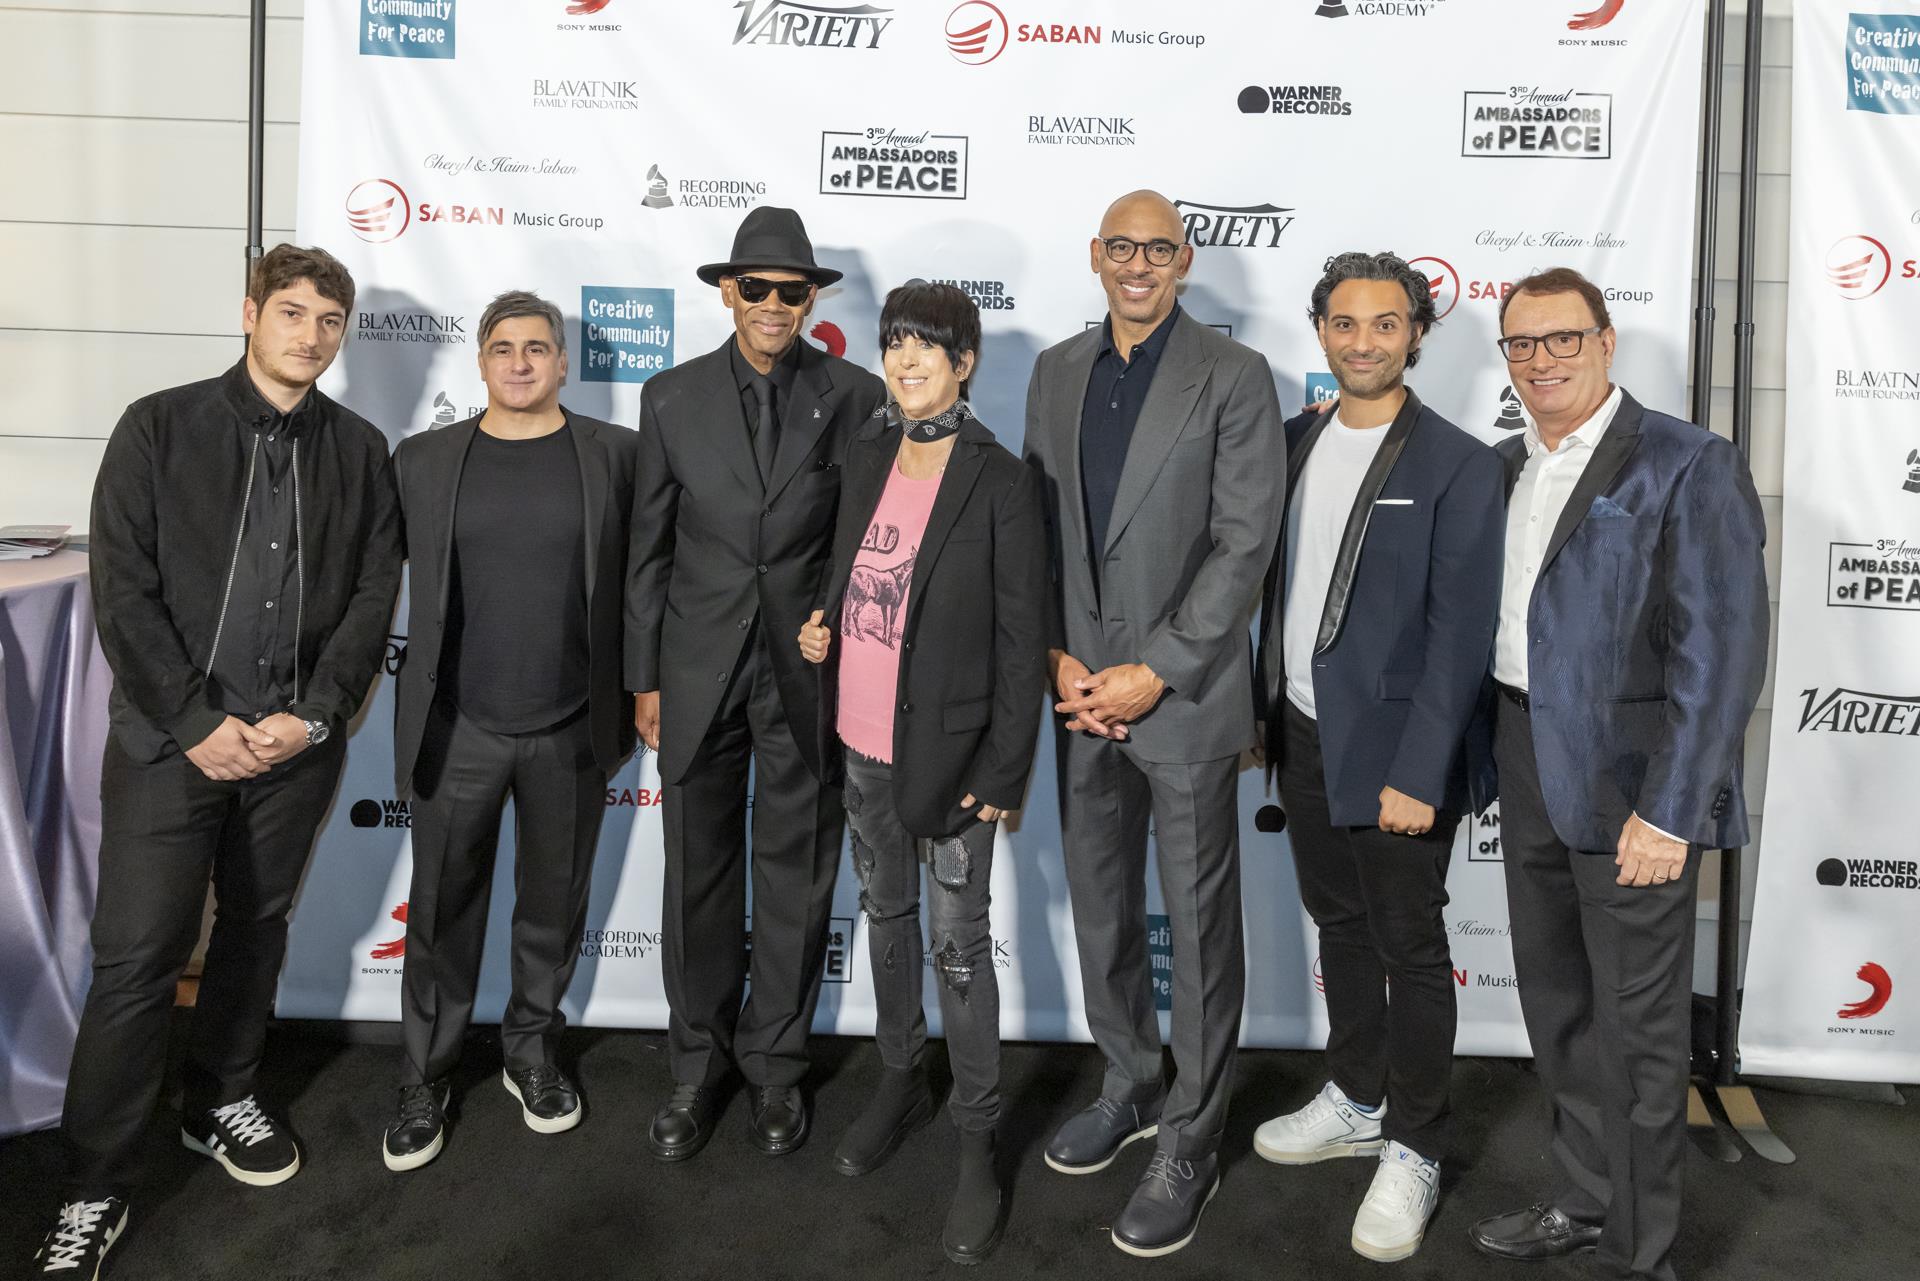 Ambassadors of Peace Celebration Honors Music Industry Difference Makers